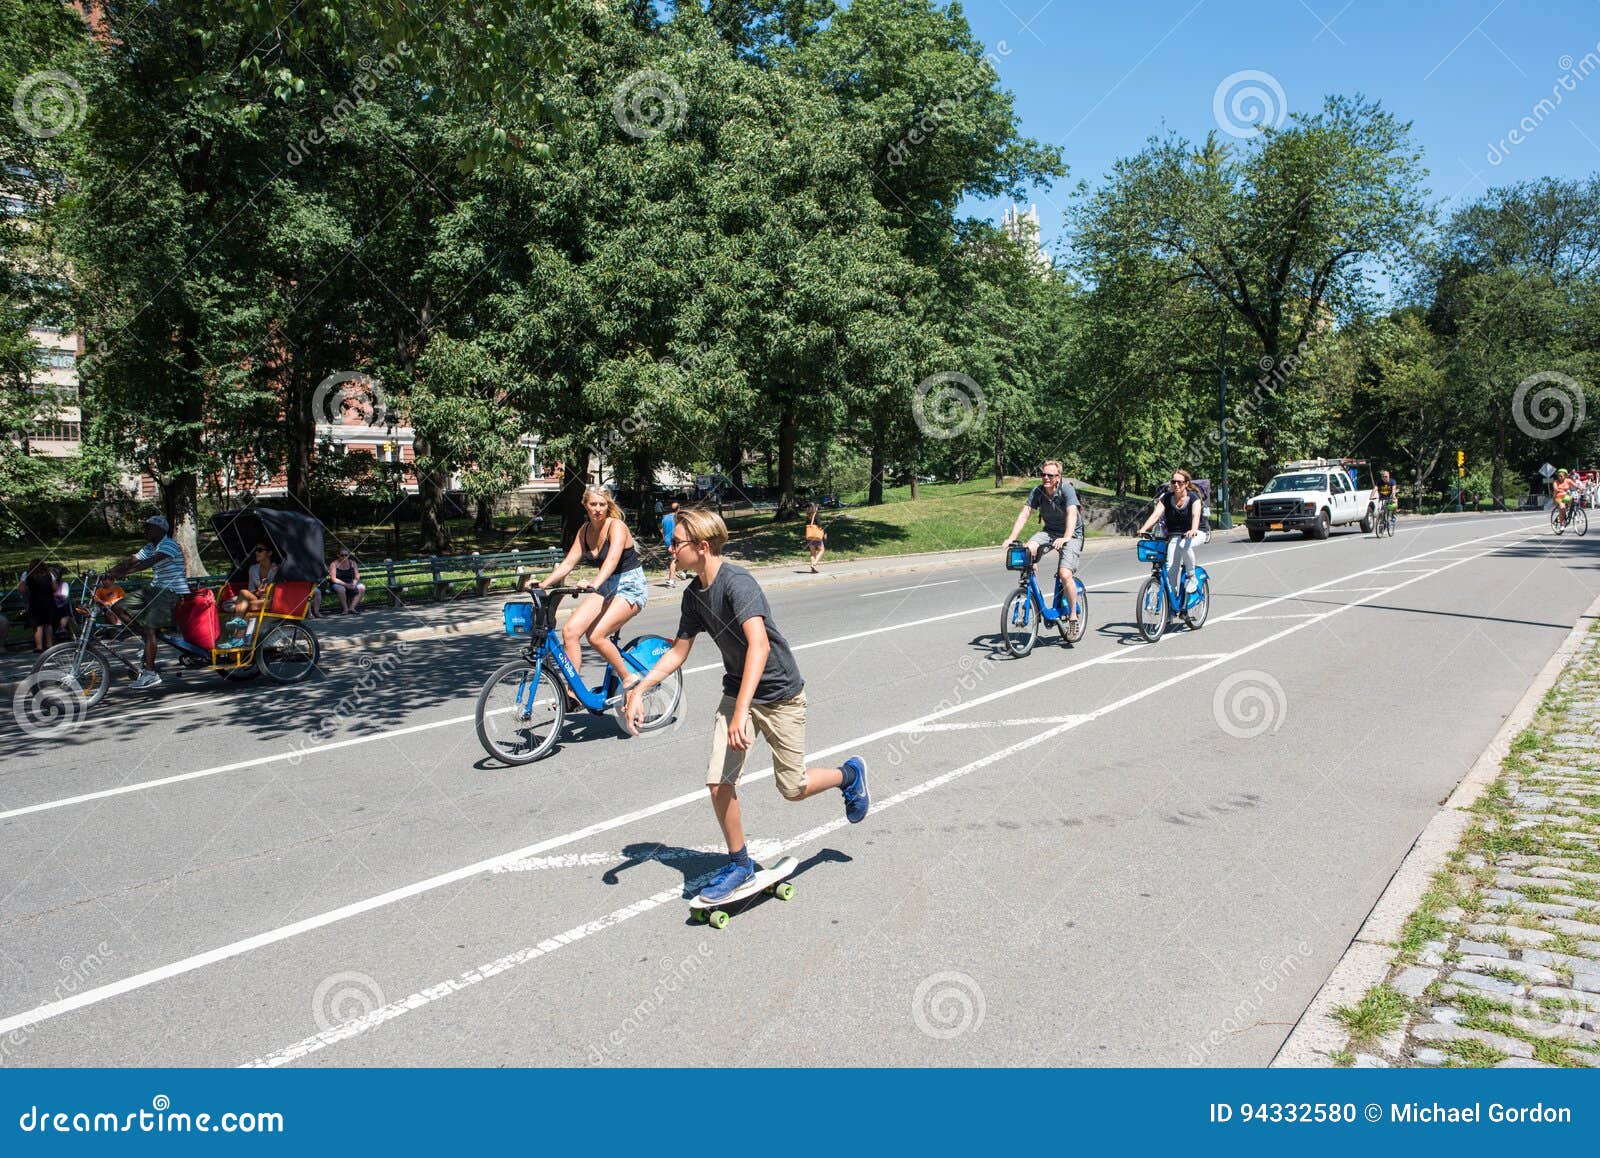 Central Park in New York City NYC Editorial Image - Image of united ...